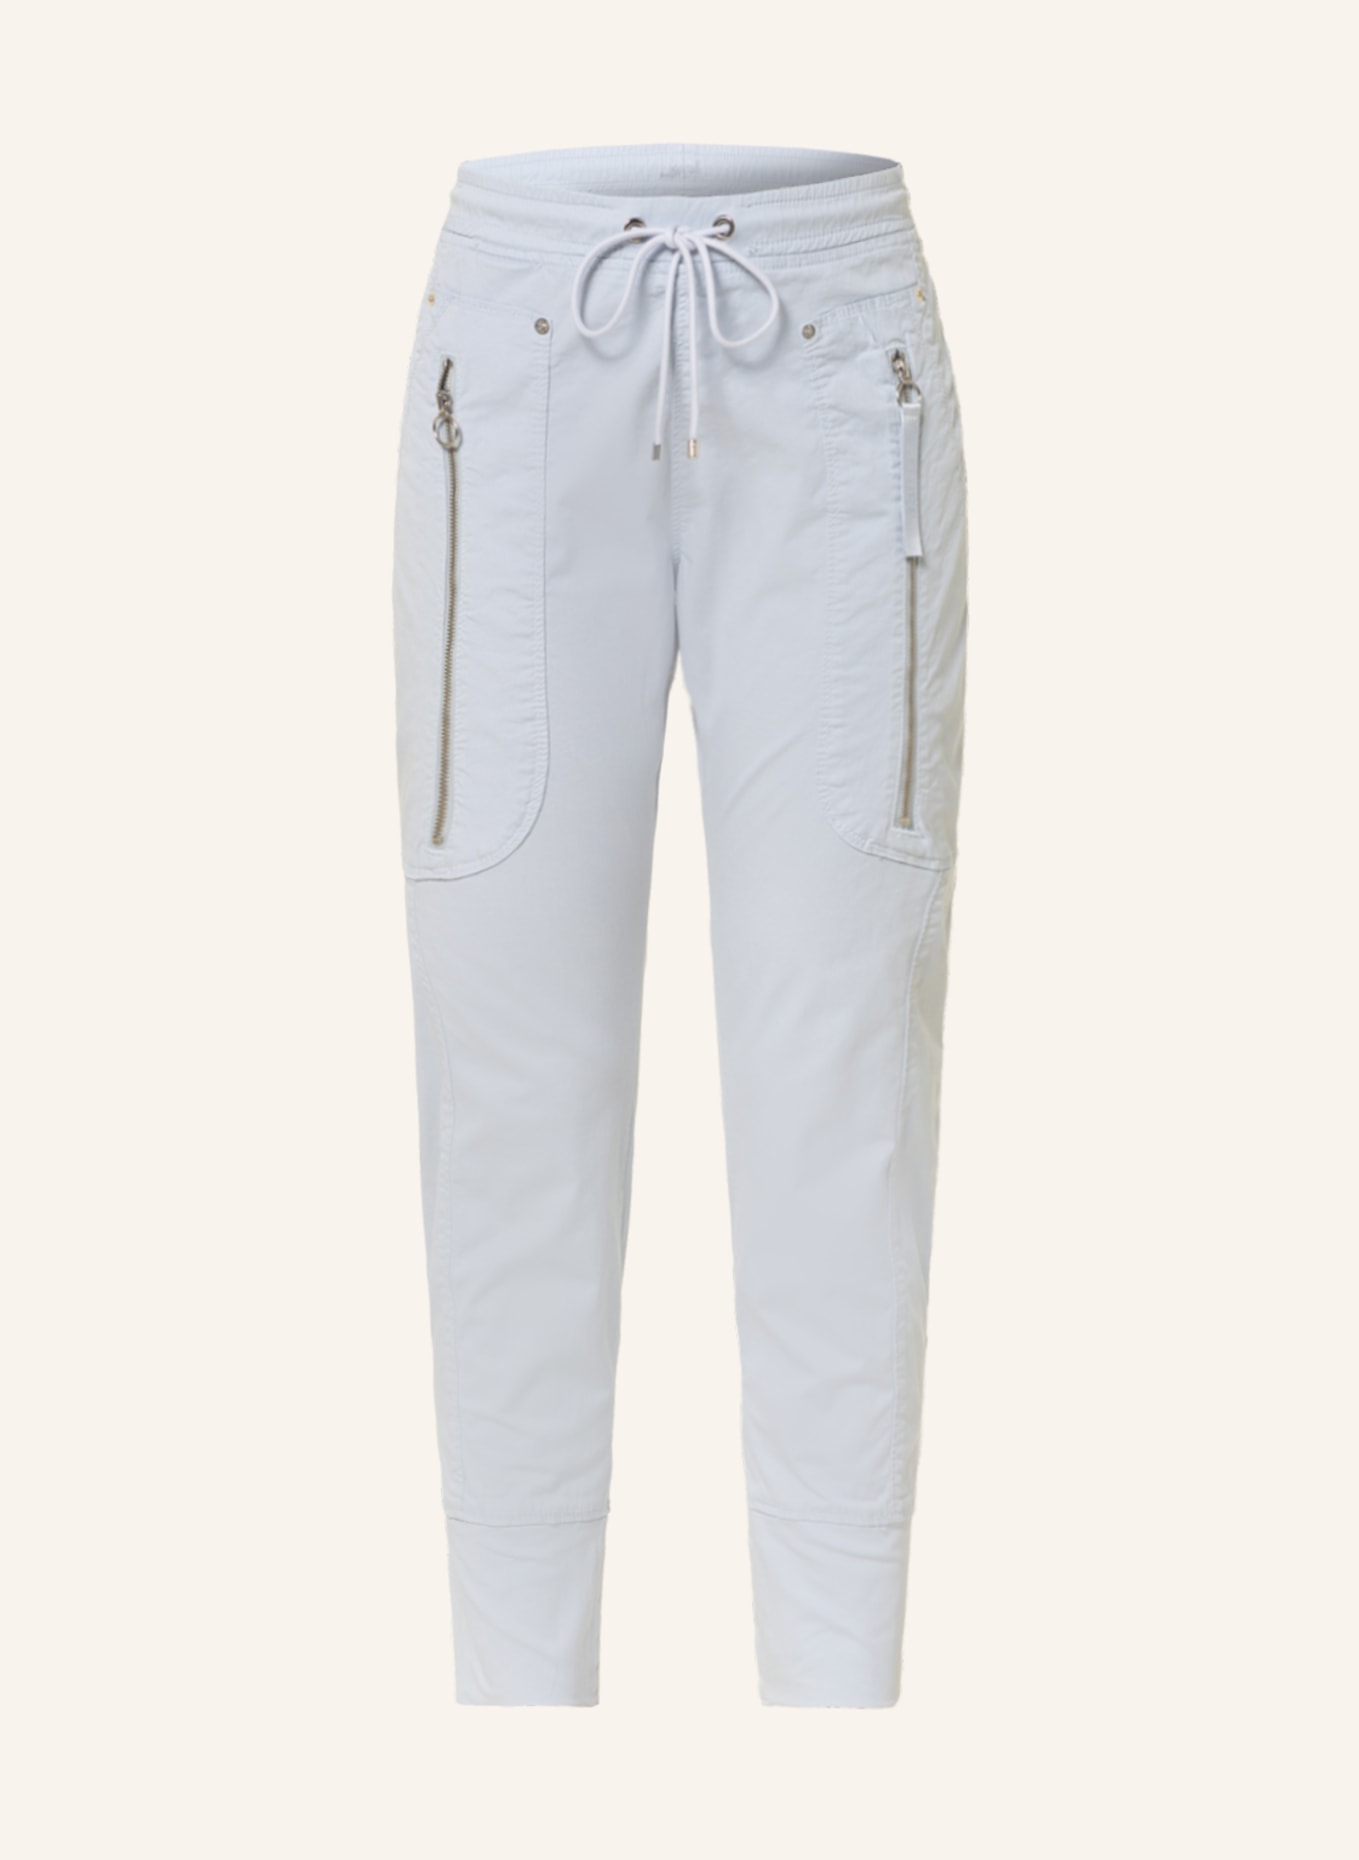 MAC Pants FUTURE in jogger style, Color: LIGHT BLUE (Image 1)